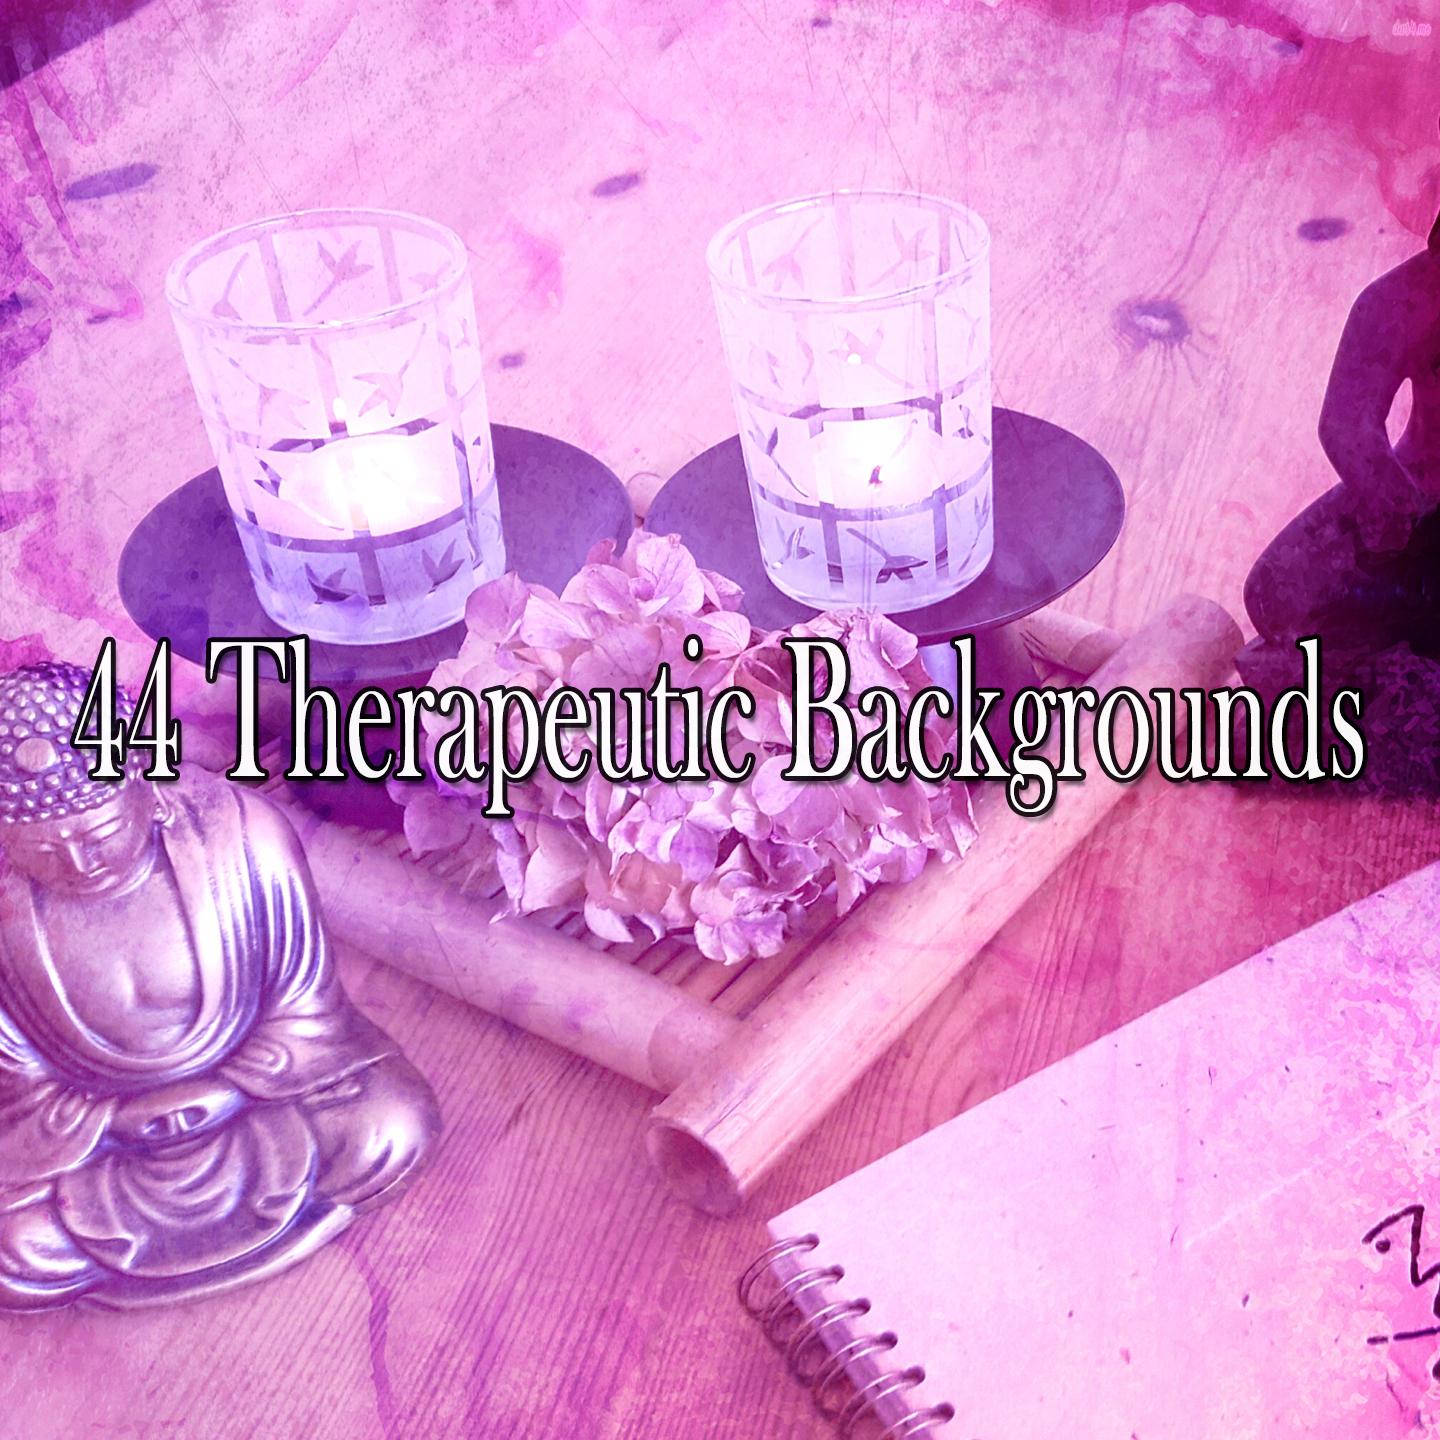 44 Therapeutic Backgrounds